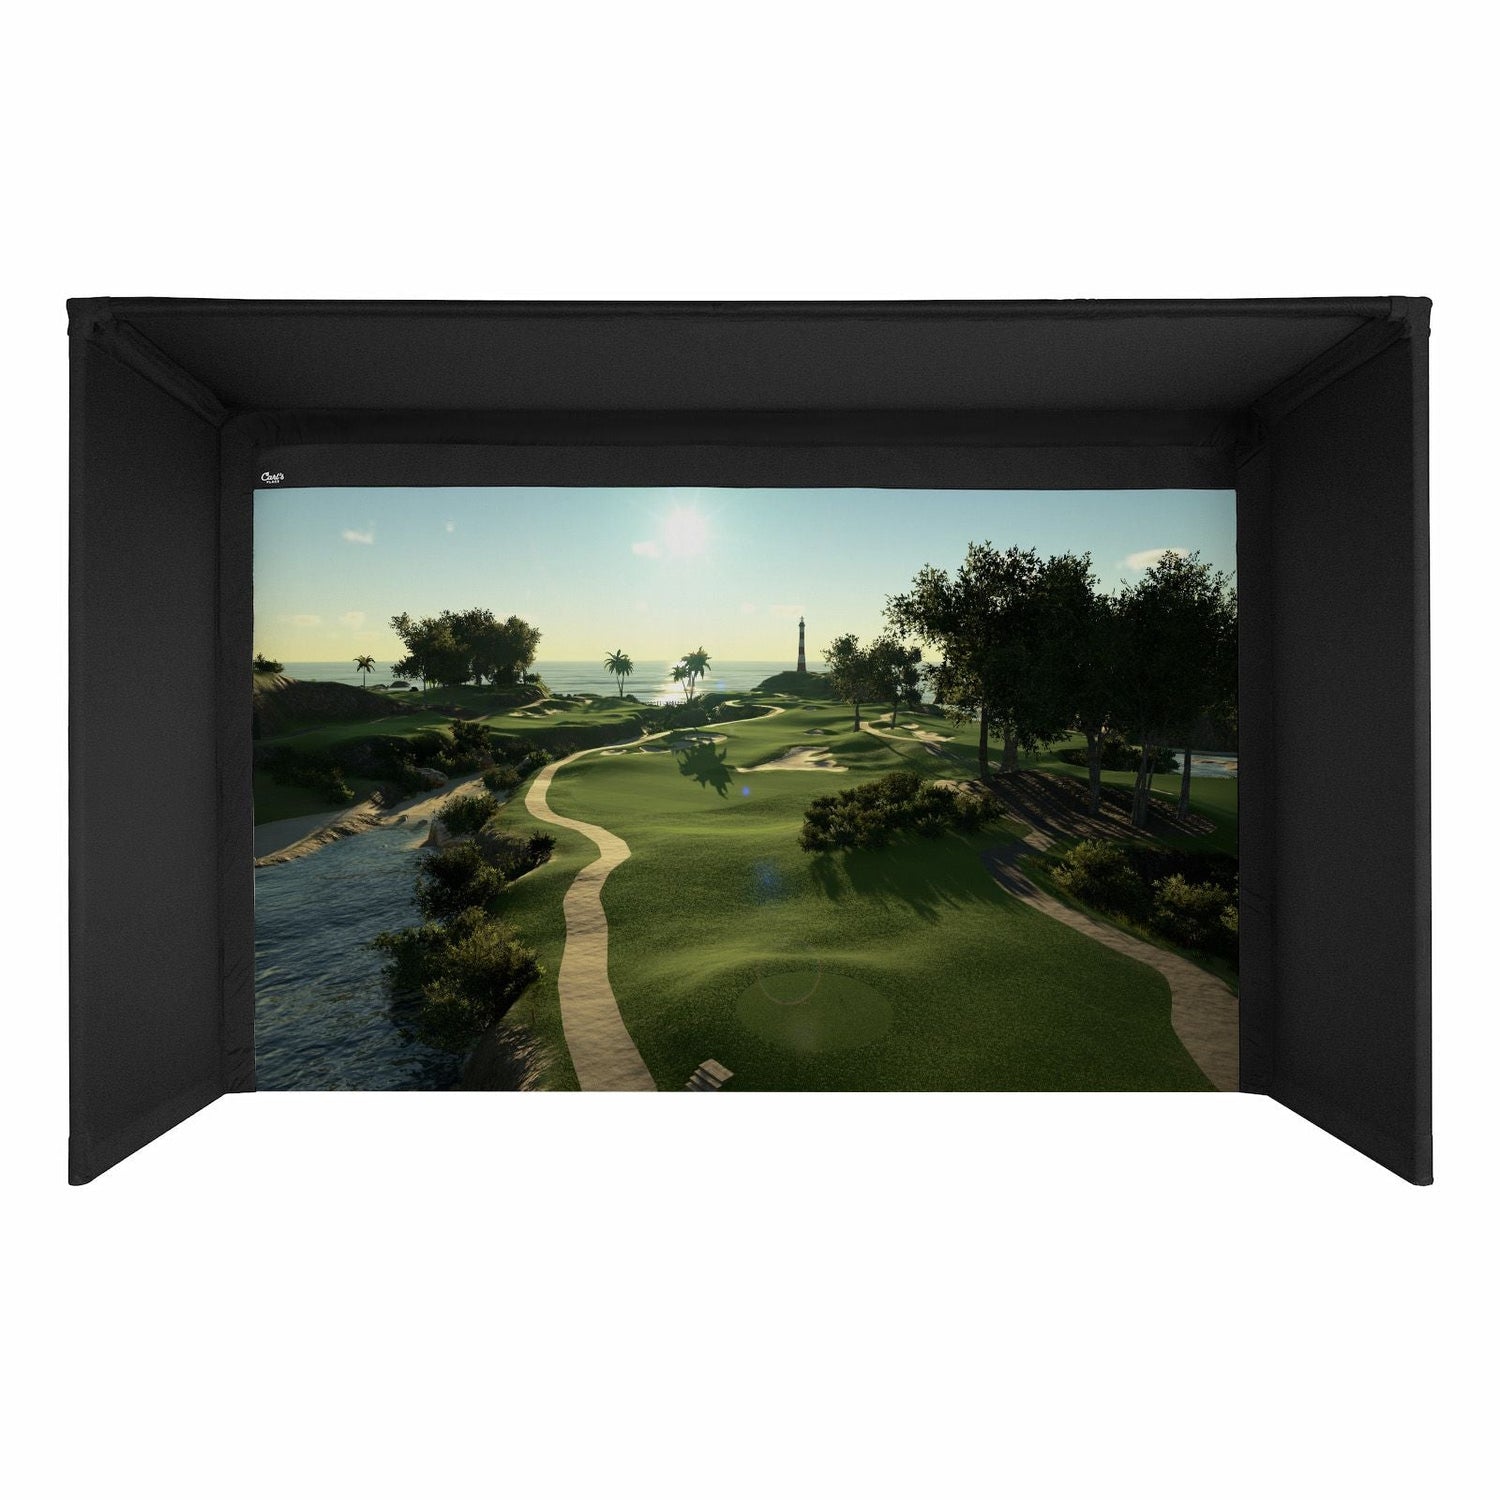 Carl's Place C-Series Pro Golf Simulator Bay with Impact Screen with 10’ Enclosure Depth - Big Horn Golfer